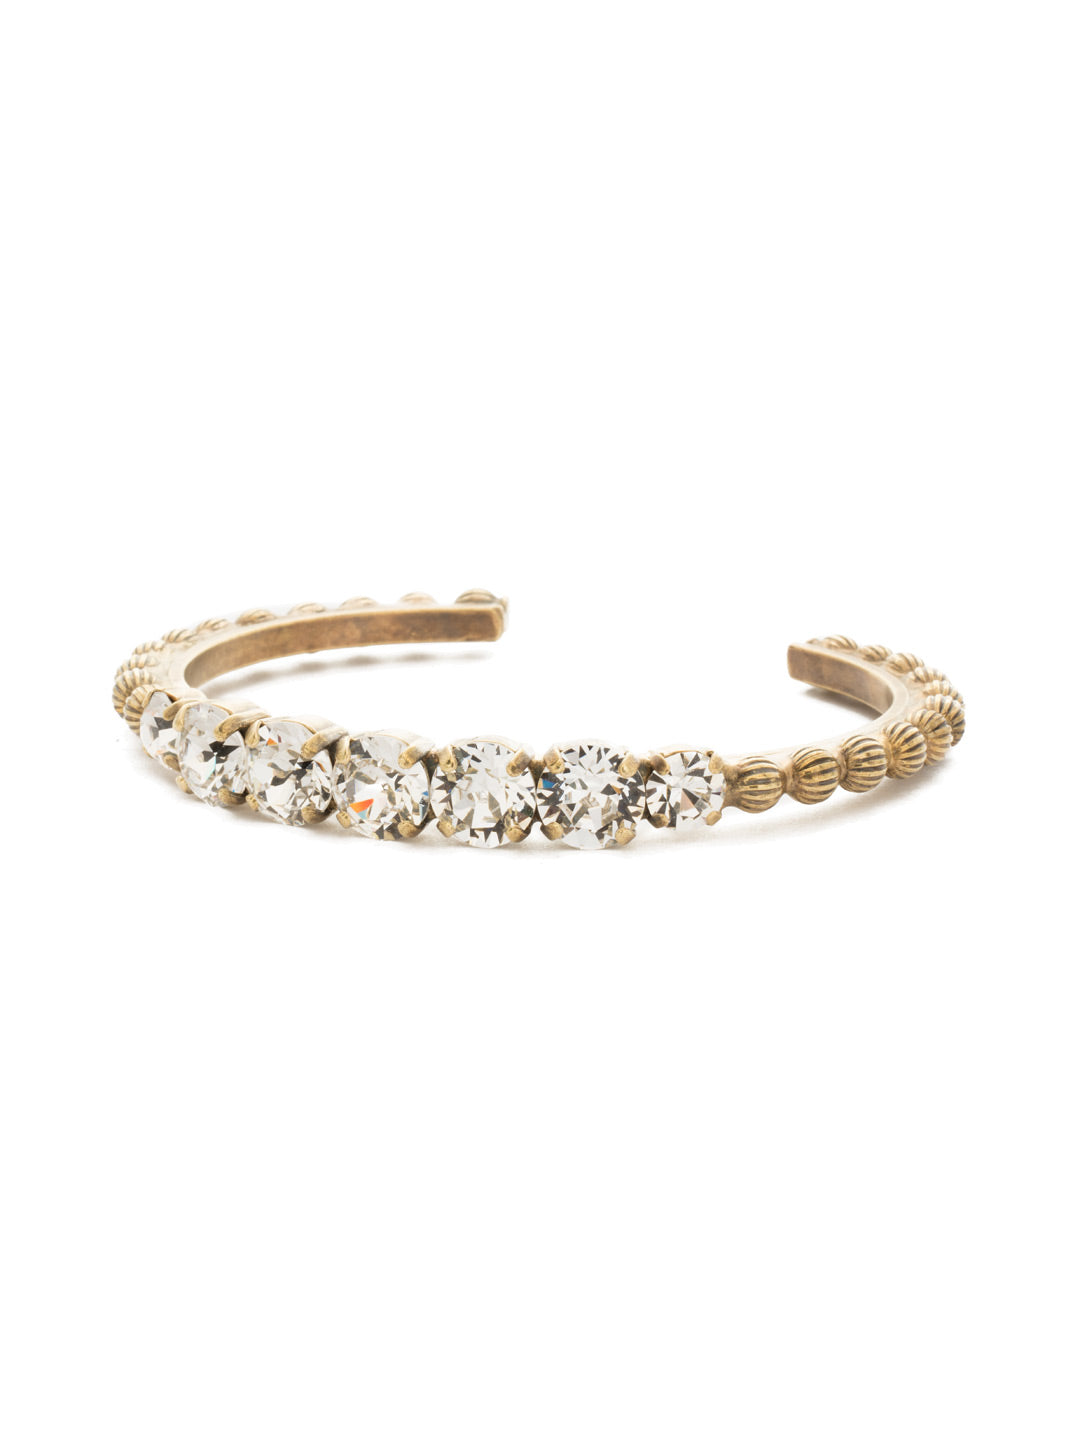 Mimosa Cuff Bracelet - BDQ24AGCRY - <p>A stylish cuff bracelet with far-away flare! Decorative ball chain accents this adjustable cuff featuring round and oval cut crystals. From Sorrelli's Crystal collection in our Antique Gold-tone finish.</p>